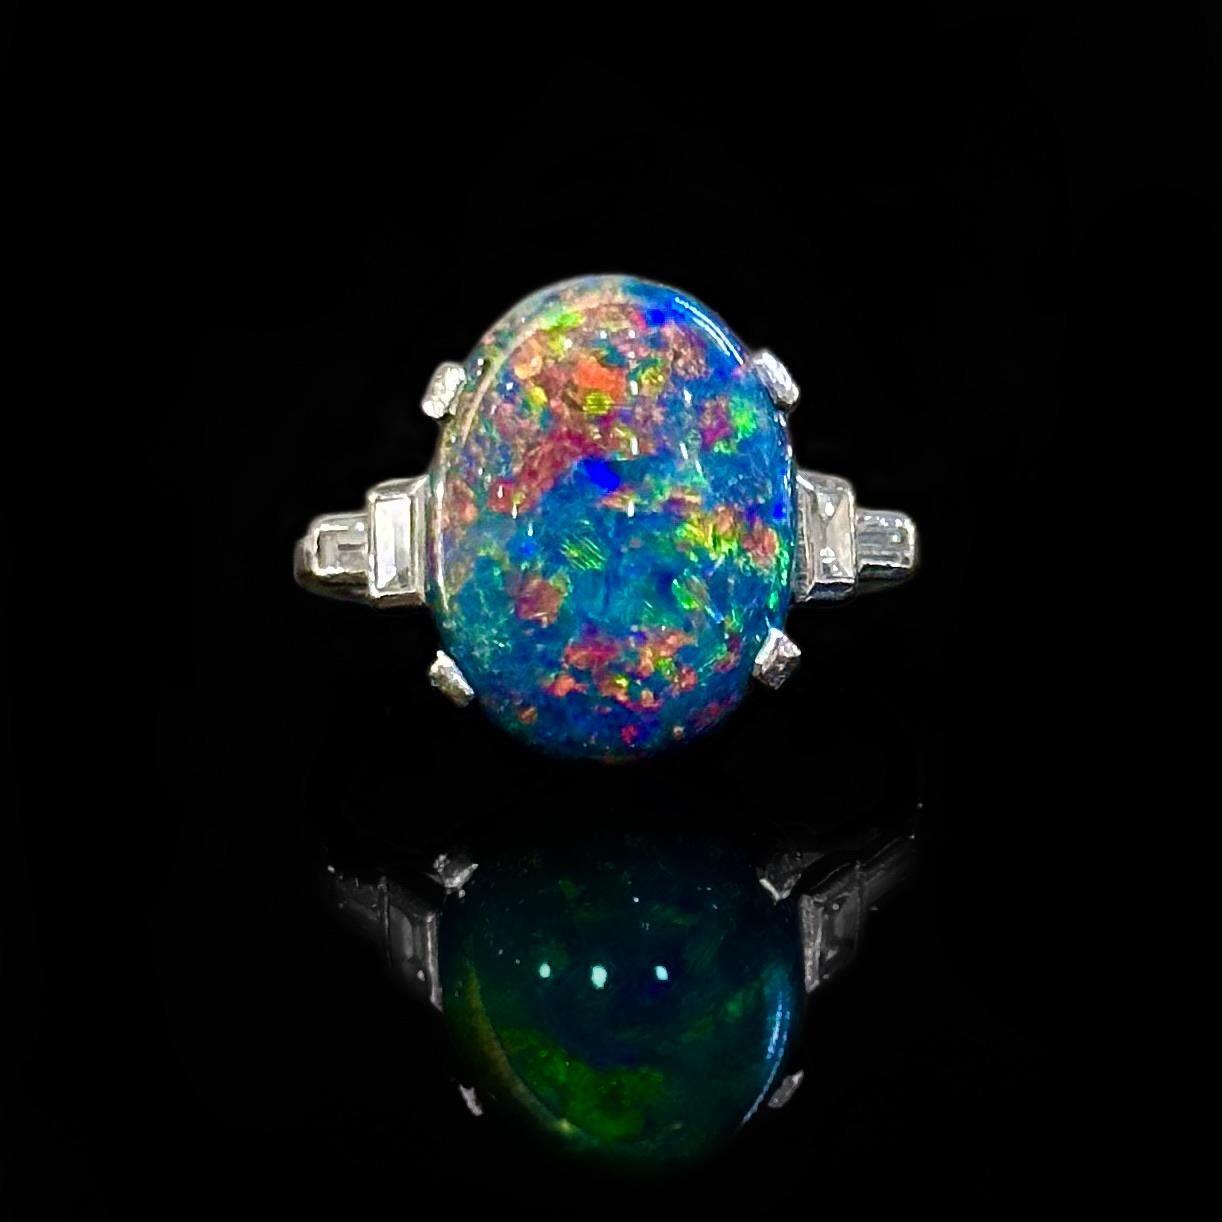 Art Deco Australian Lightning Ridge Harlequin precious black opal and baguette-cut diamond engagement or cocktail ring in platinum, circa 1930, probably American. This ring features a rare natural and solid precious black opal which exuberates